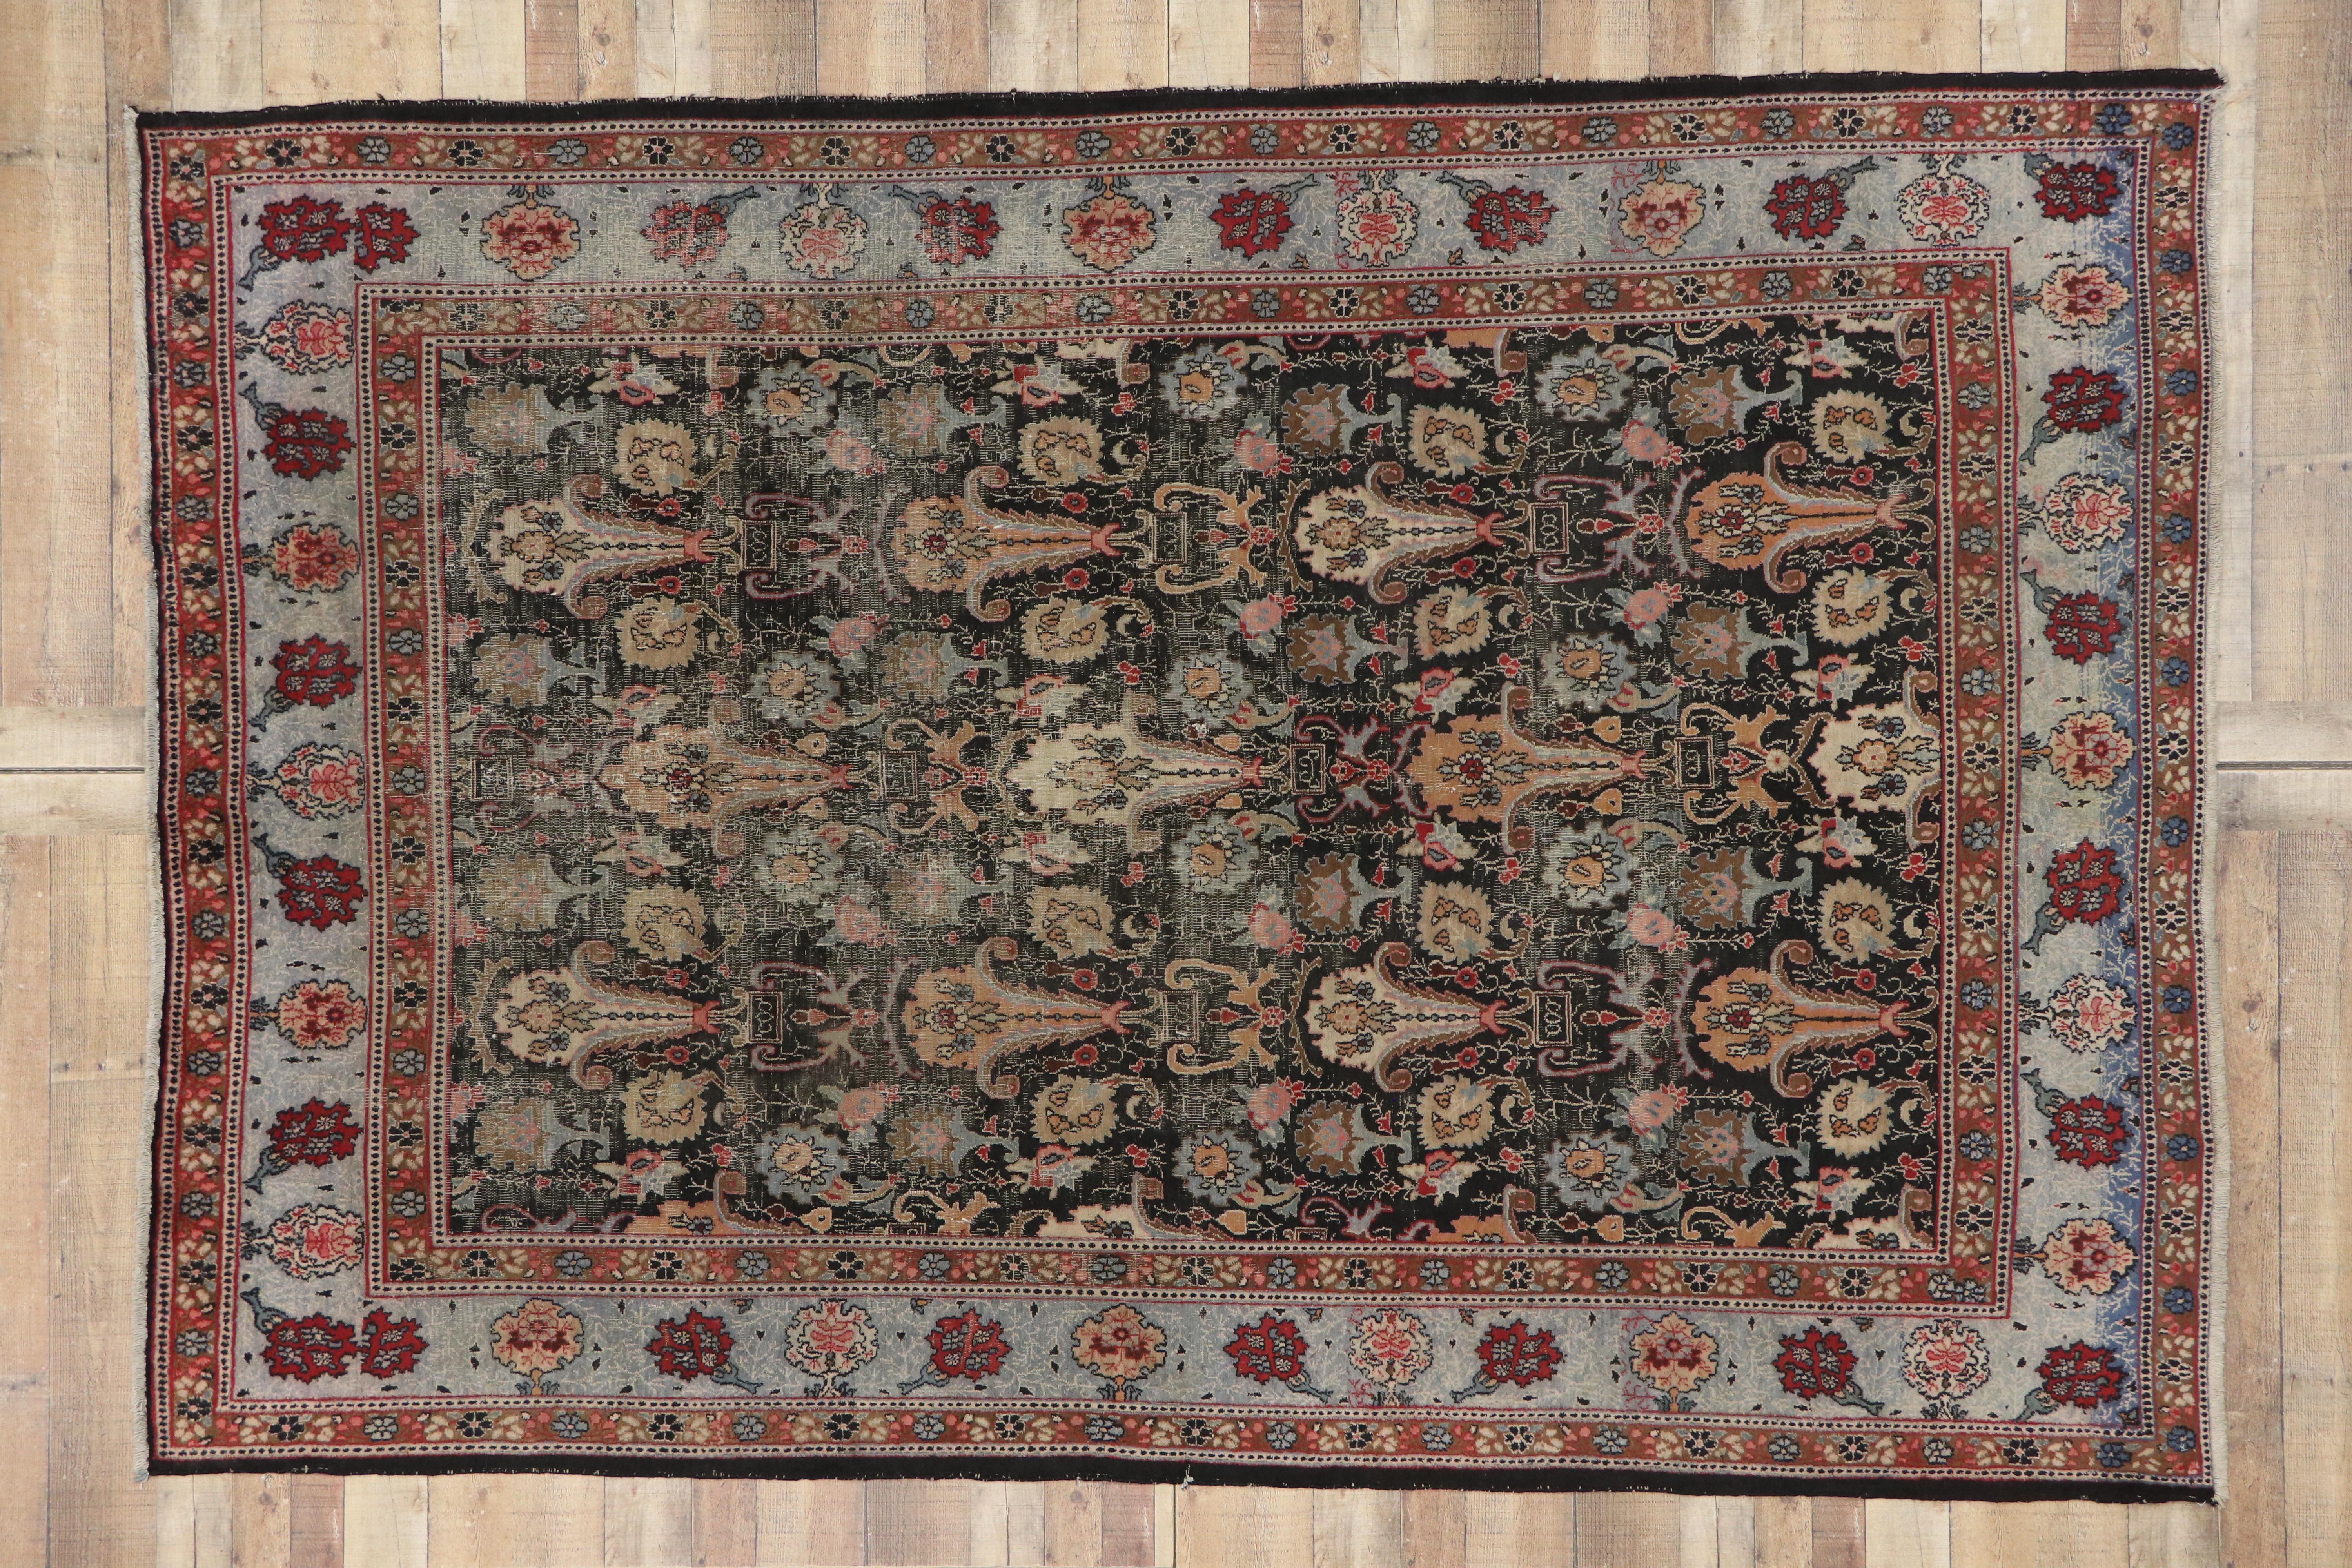 Distressed Antique Persian Khorassan Rug with Rustic American Colonial Style For Sale 4